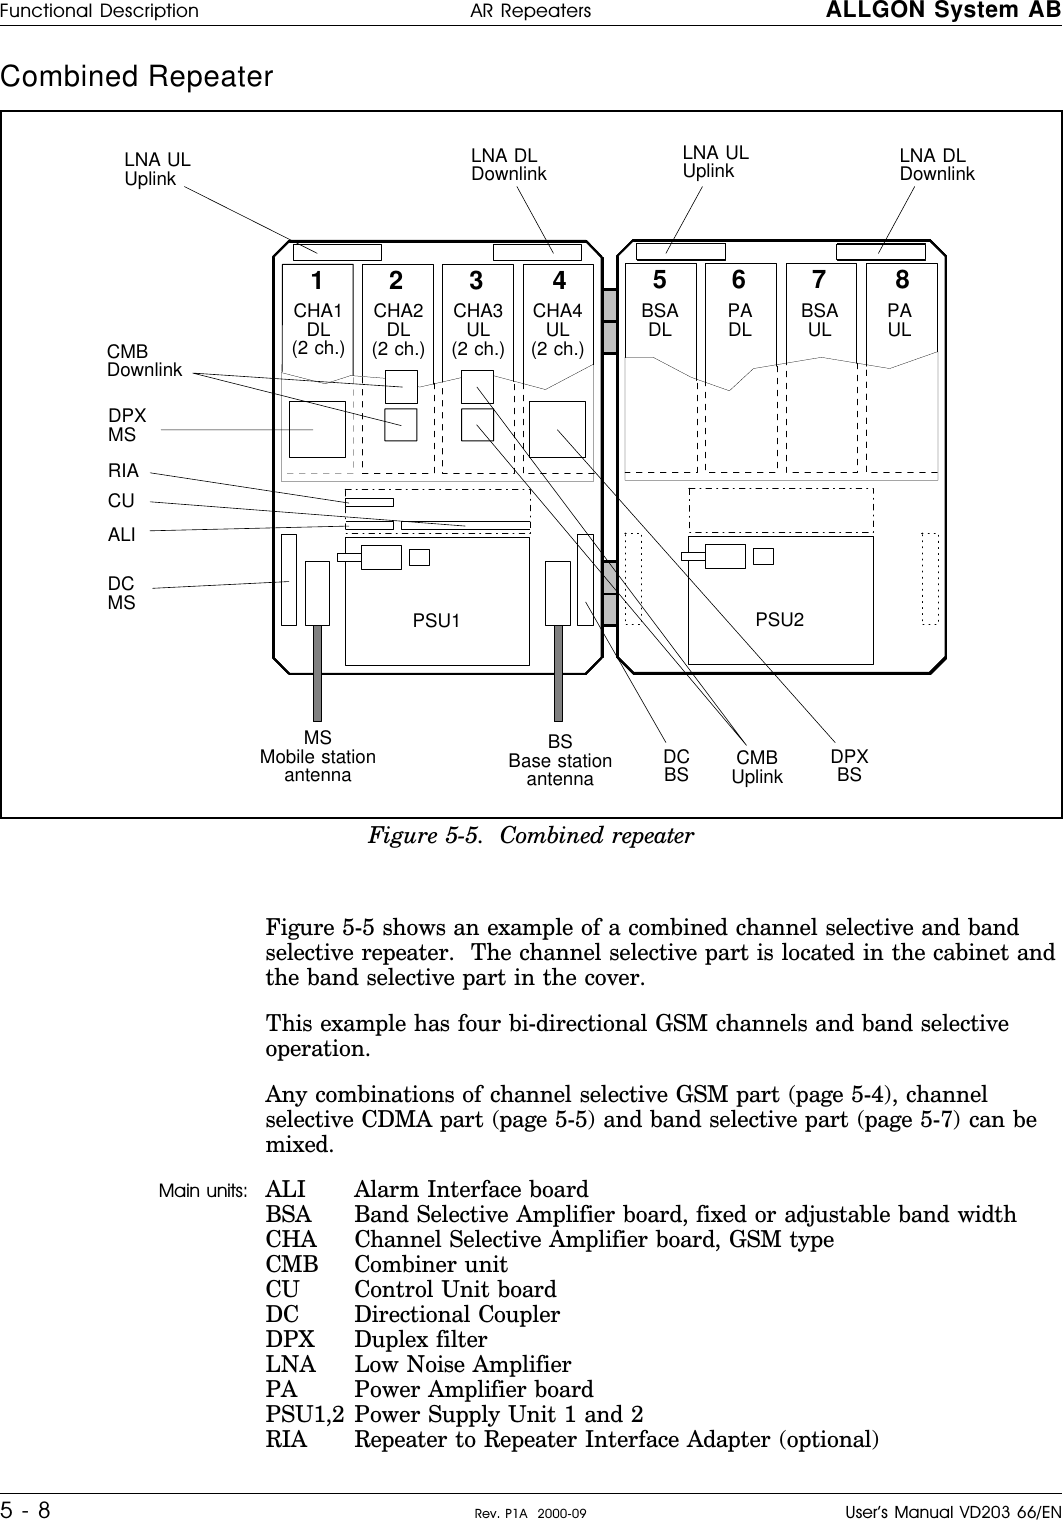 Combined Repeater           Figure 5-5 shows an example of a combined channel selective and bandselective repeater.  The channel selective part is located in the cabinet andthe band selective part in the cover.This example has four bi-directional GSM channels and band selectiveoperation.Any combinations of channel selective GSM part (page 5-4), channelselective CDMA part (page 5-5) and band selective part (page 5-7) can bemixed.Main units: ALI Alarm Interface boardBSA Band Selective Amplifier board, fixed or adjustable band widthCHA Channel Selective Amplifier board, GSM typeCMB Combiner unitCU Control Unit boardDC Directional CouplerDPX Duplex filterLNA Low Noise AmplifierPA Power Amplifier boardPSU1,2 Power Supply Unit 1 and 2RIA Repeater to Repeater Interface Adapter (optional)123 4 567 8CHA1DL(2 ch.)MSMobile stationantennaBSBase stationantennaCHA2DL(2 ch.)CHA3UL(2 ch.)CHA4UL(2 ch.)LNA DLDownlinkLNA ULUplinkCMBDownlinkDPXMSDCMSCUALIDCBS CMBUplink DPXBSPSU1BSADL PADL BSAUL PAULLNA ULUplink LNA DLDownlinkPSU2RIAFigure 5-5.  Combined repeaterFunctional Description AR Repeaters ALLGON System AB5 - 8 Rev. P1A  2000-09 User’s Manual VD203 66/EN